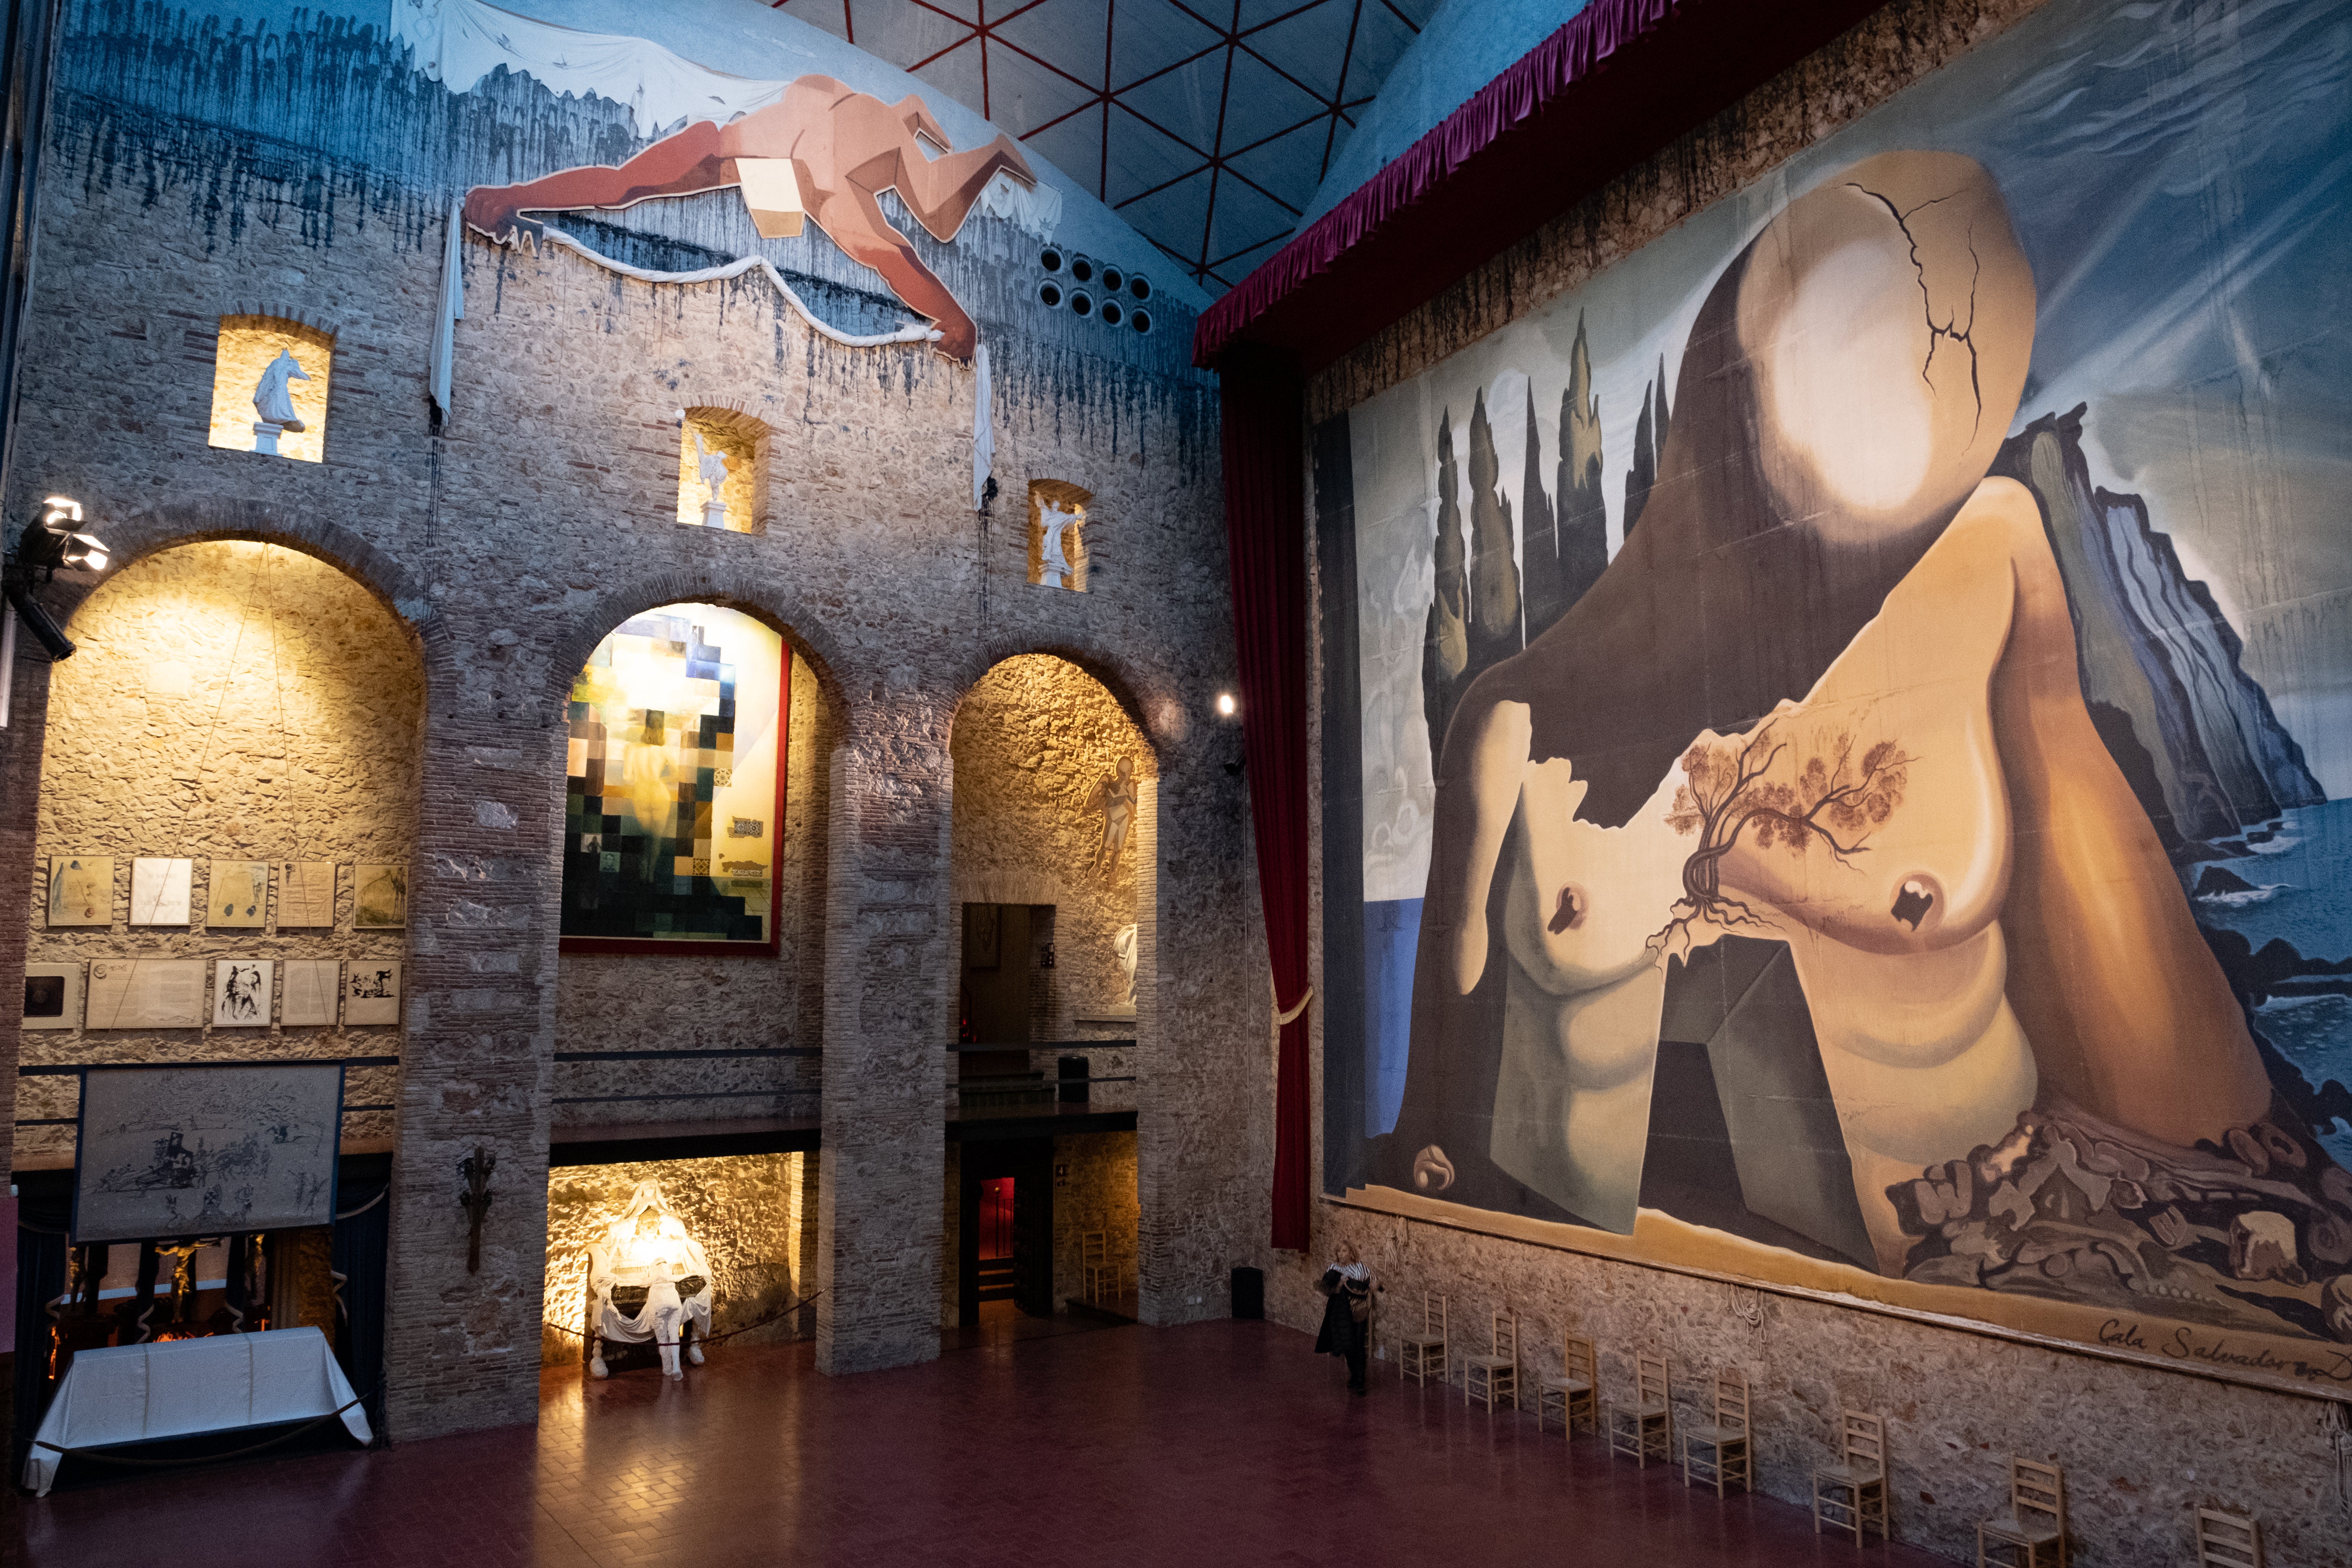 Those passing through Figueres can find a wonderful testament to Dali’s unique art in the city’s Theatre Museum